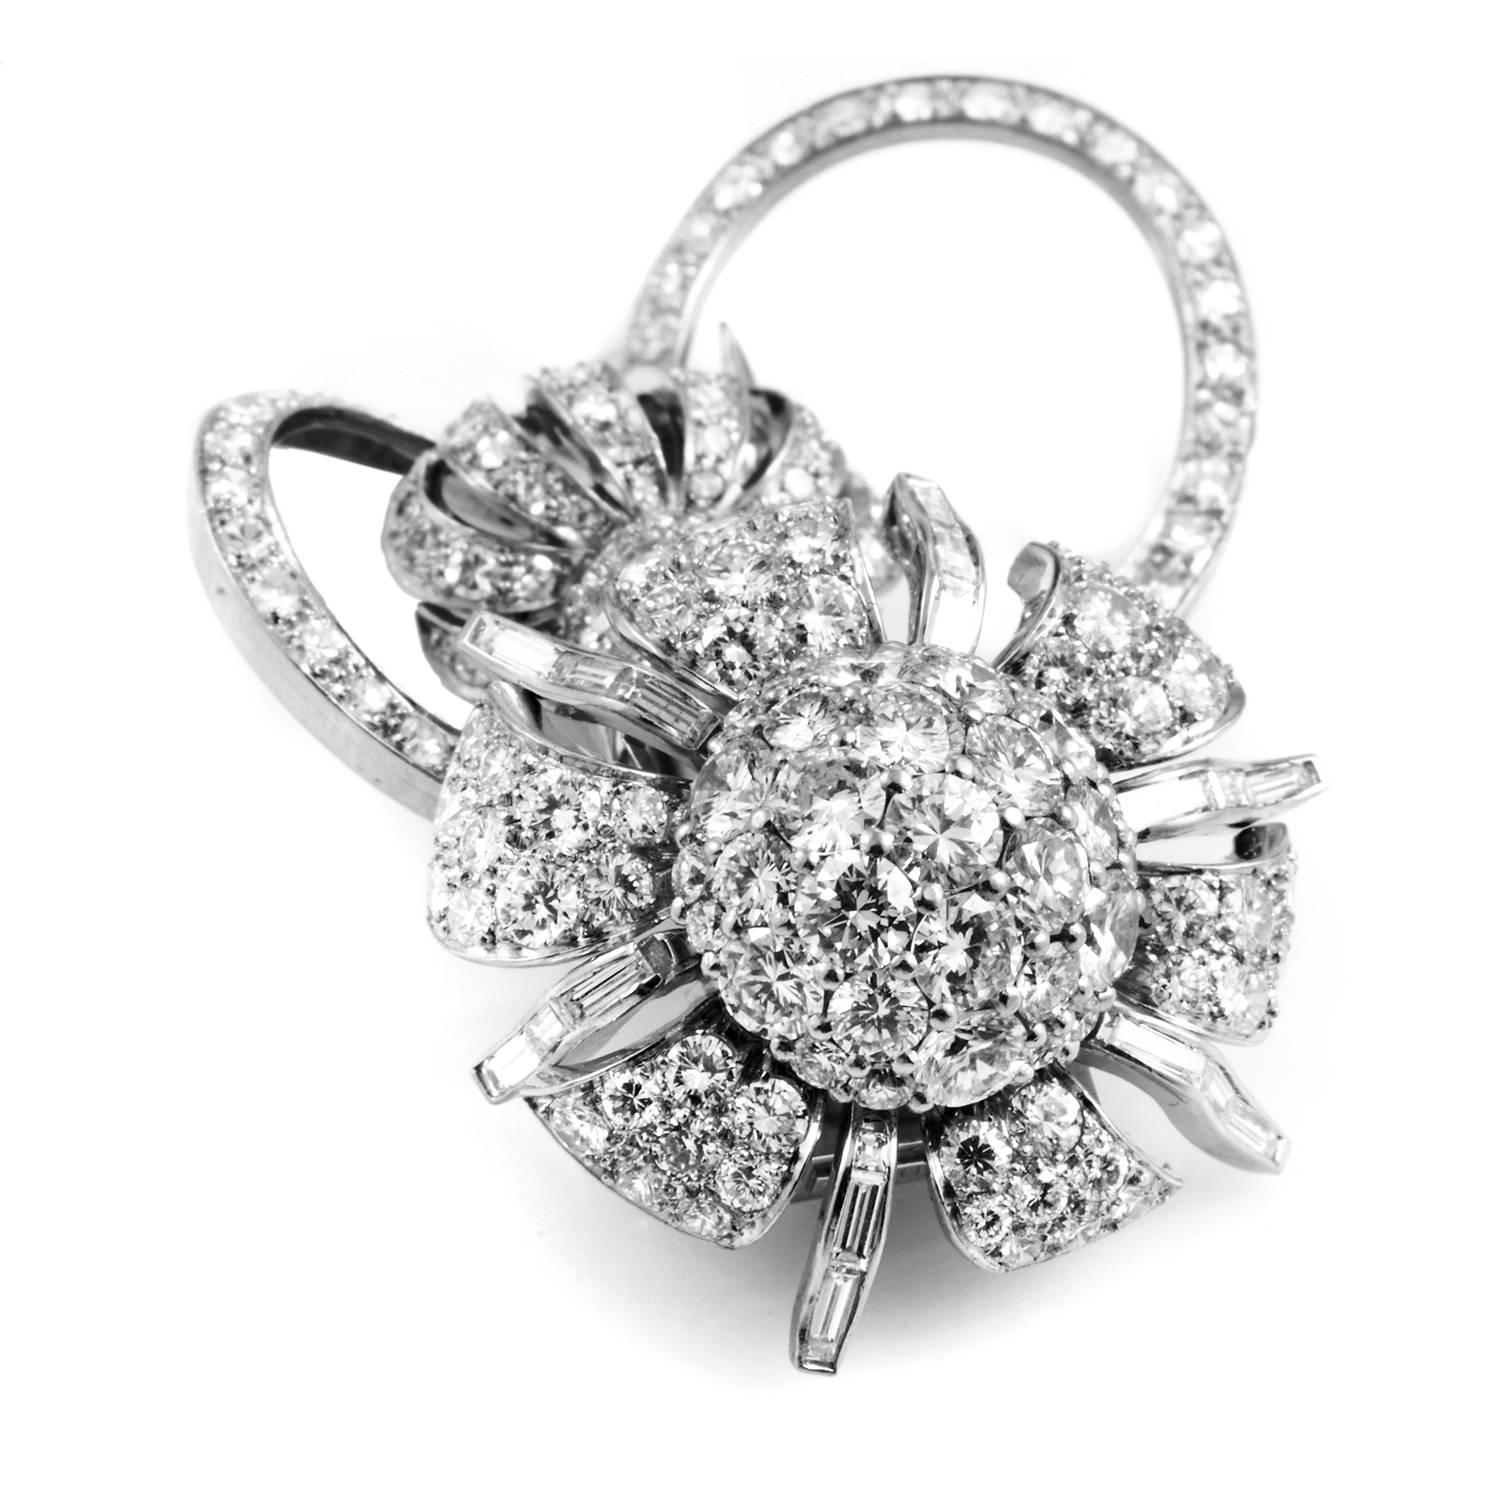 This regal brooch by Bucherer is a resplendent piece of fine craftsmanship. Made with platinum and fashioned into a crown above a flower with diamond encrusted halos, ~6ct of diamonds dazzle from the pave settings that encapsulates their beauty.